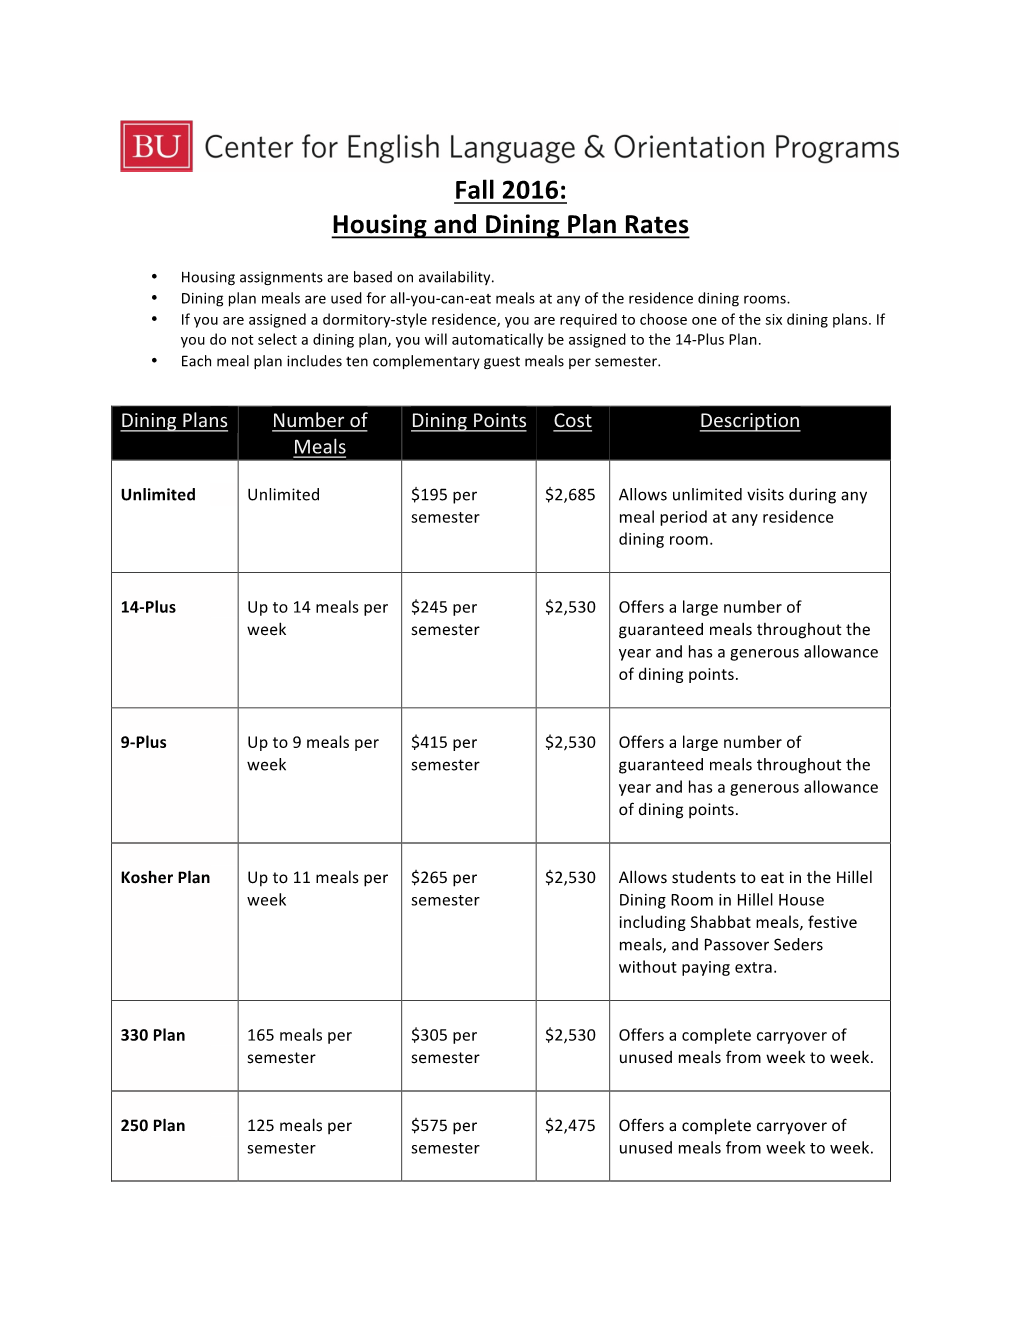 Housing and Dining Plan Rates